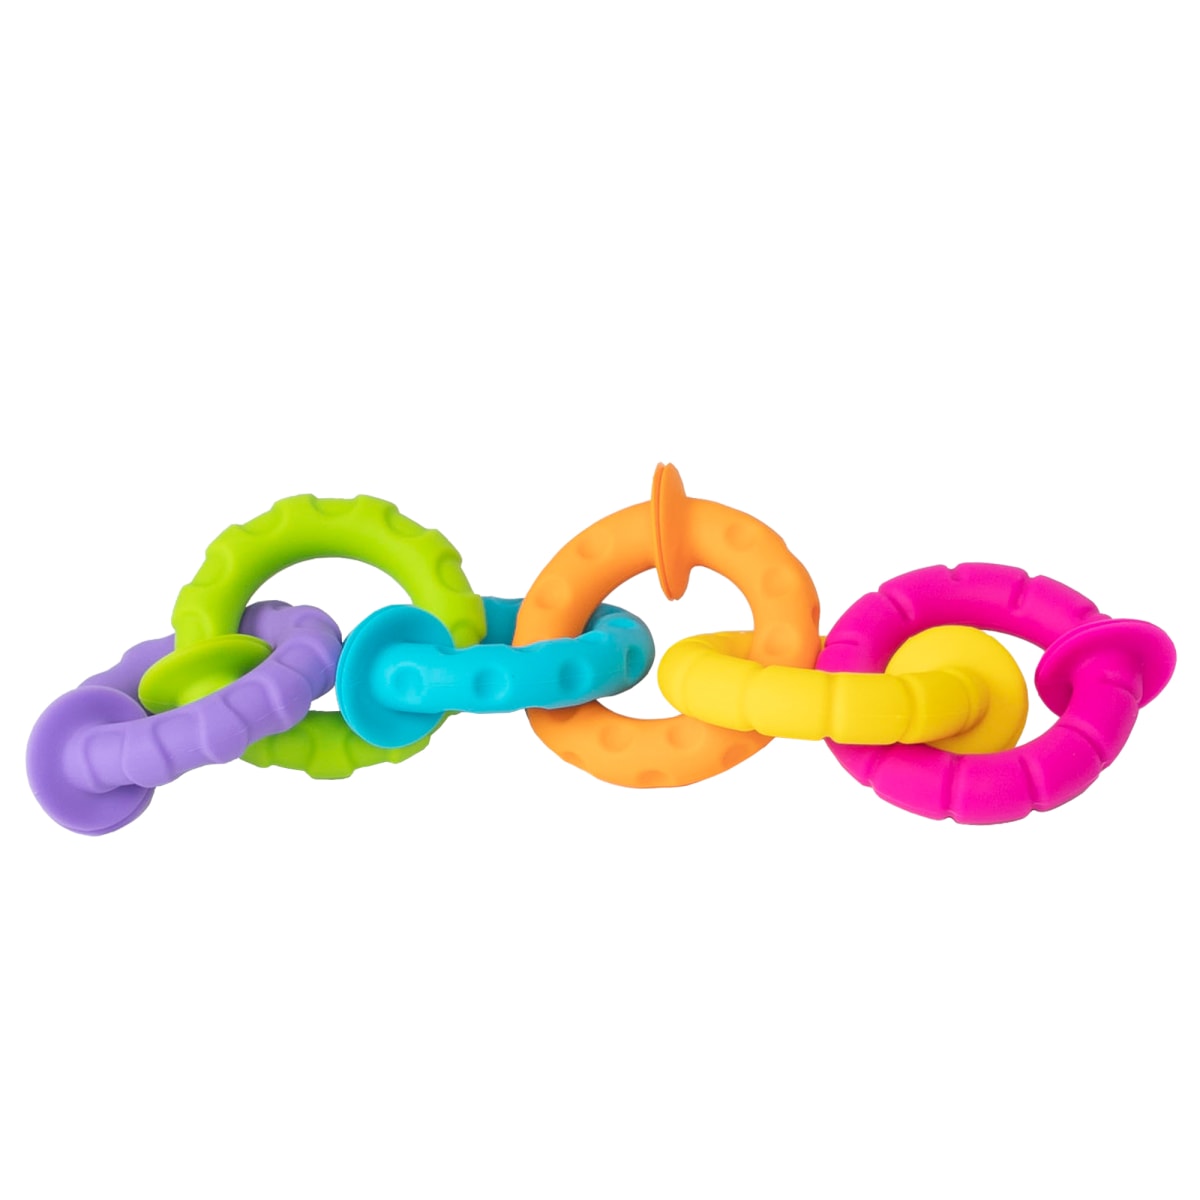 Pipsquigz ringlets anillos moderdores